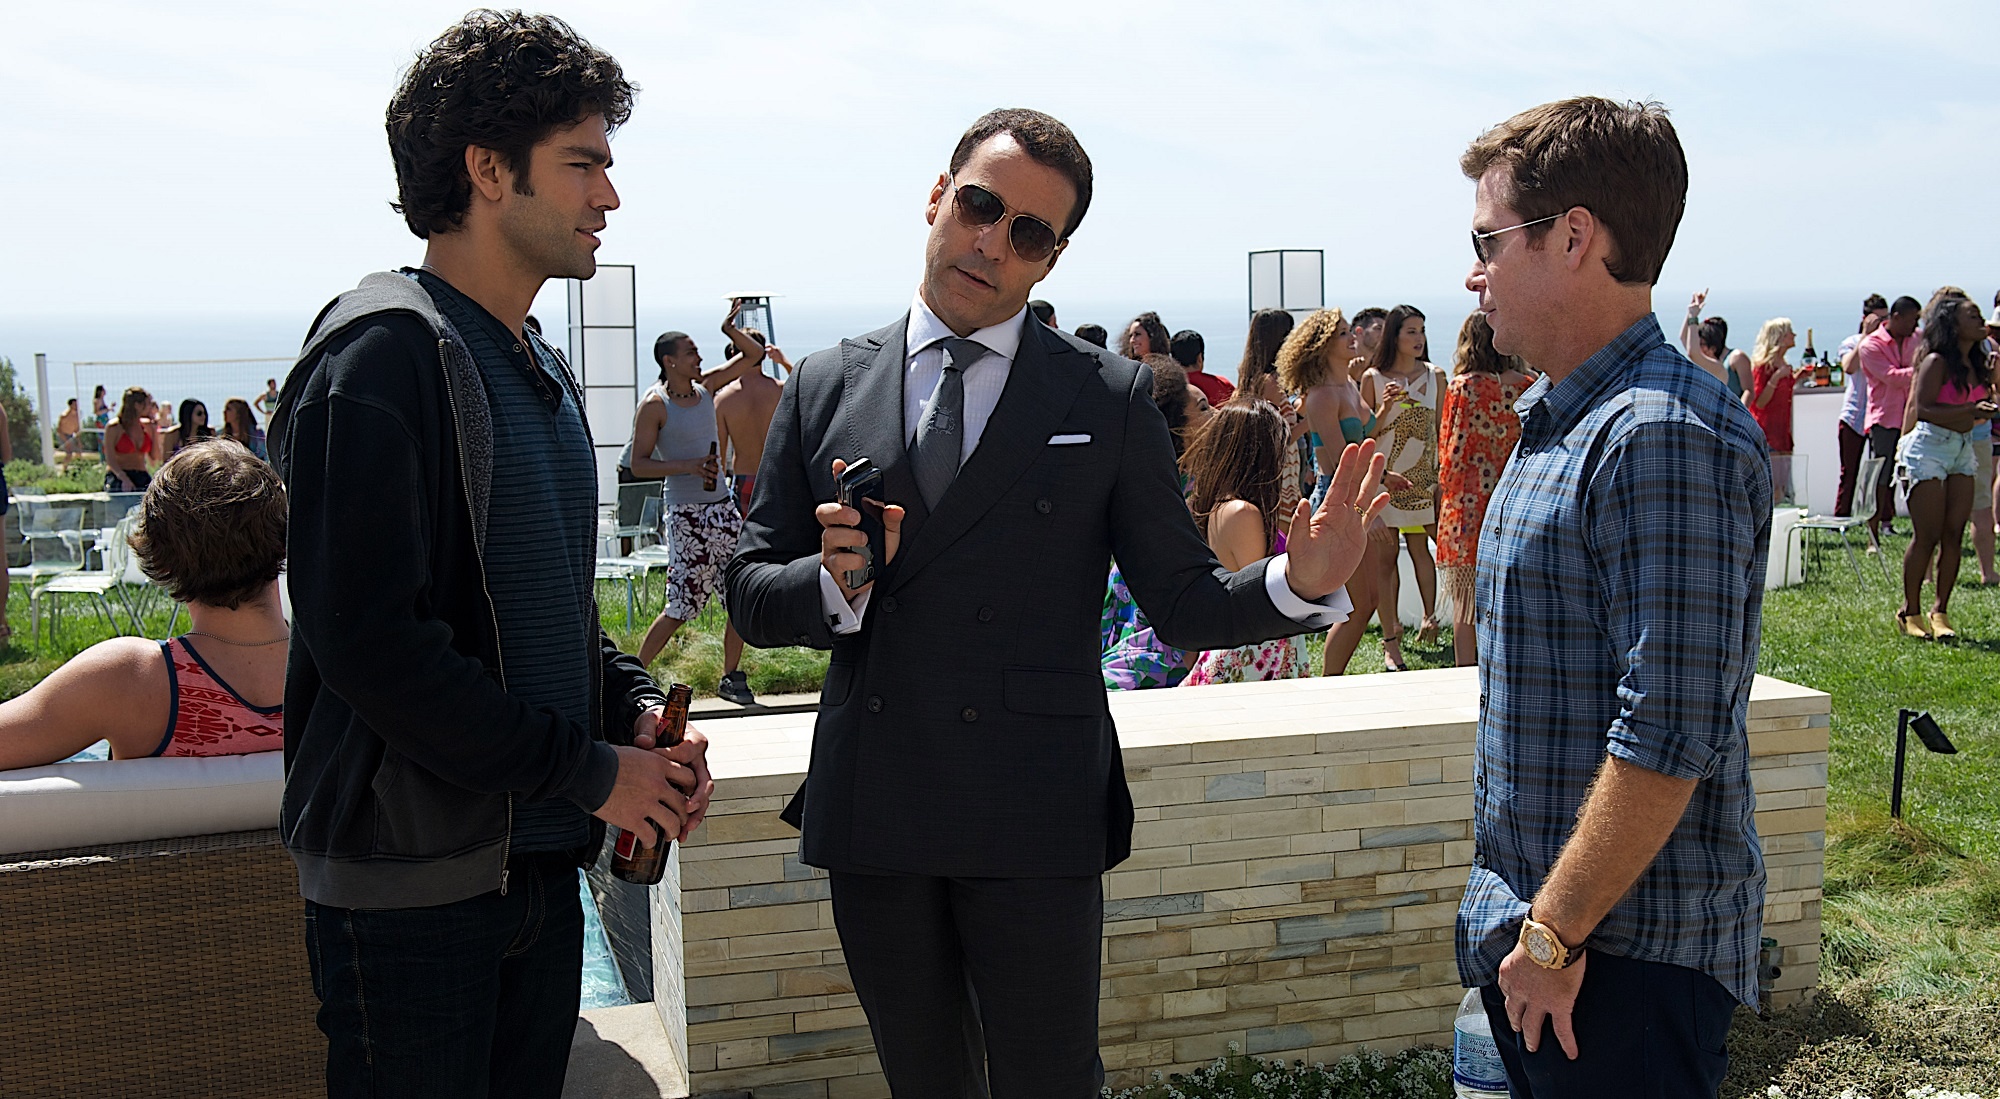 Entourage (TV Series): Vincent Chase portrayed by Adrian Grenier, Ari Gold portrayed by Jeremy Piven, Kevin Connolly as Eric Murphy. 2000x1100 HD Background.